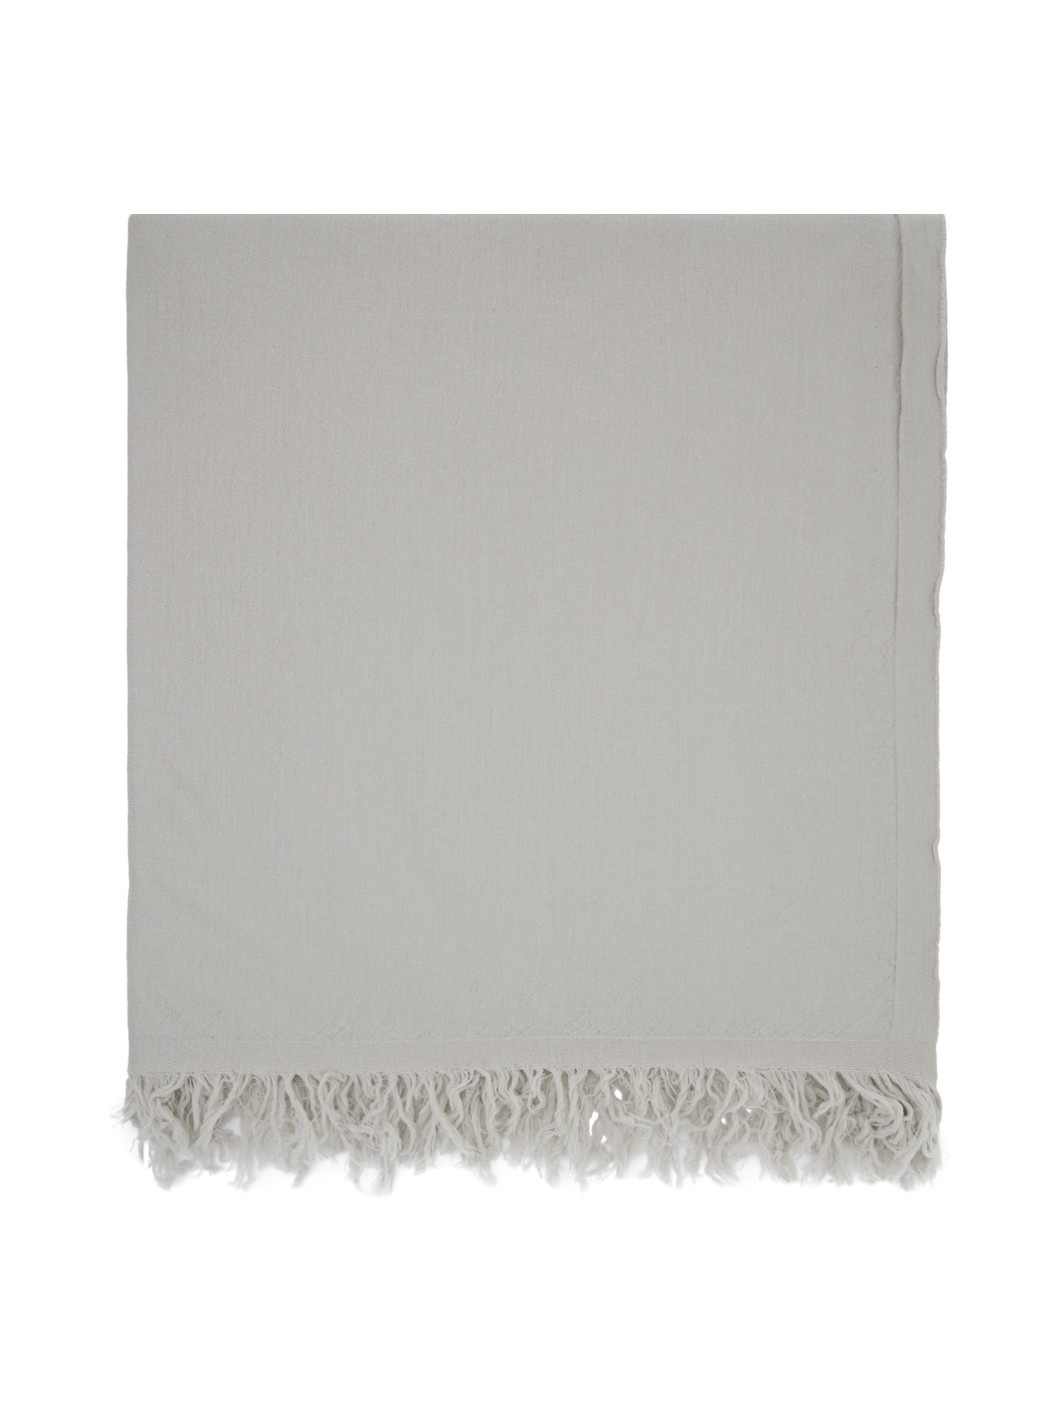 Off-White Knit Blanket Scarf - 1